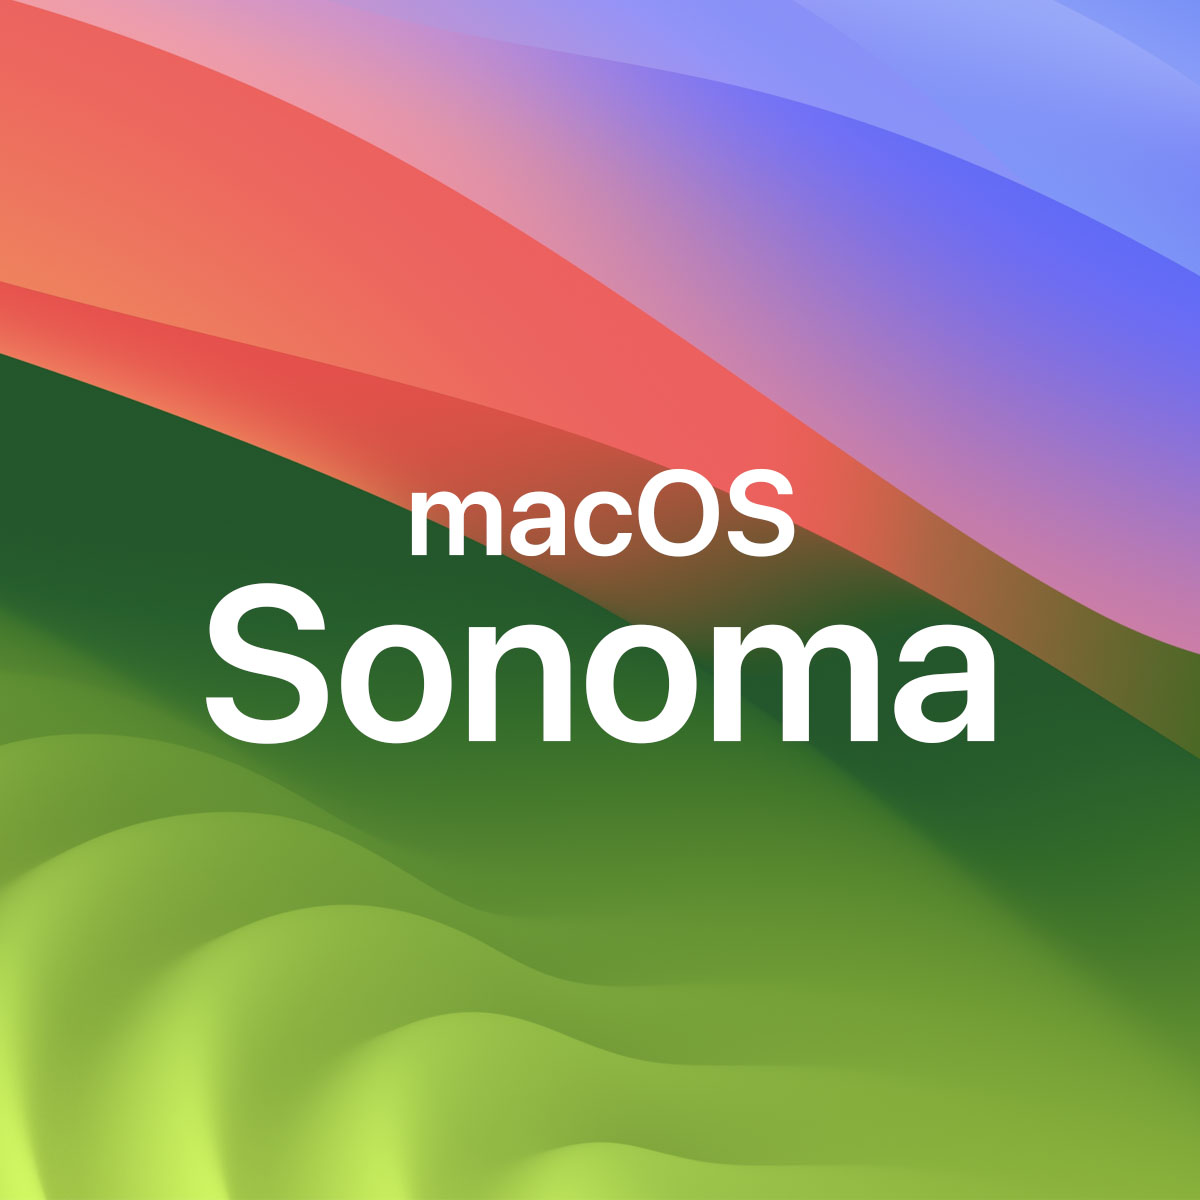 [Updated] Information about macOS Sonoma Update